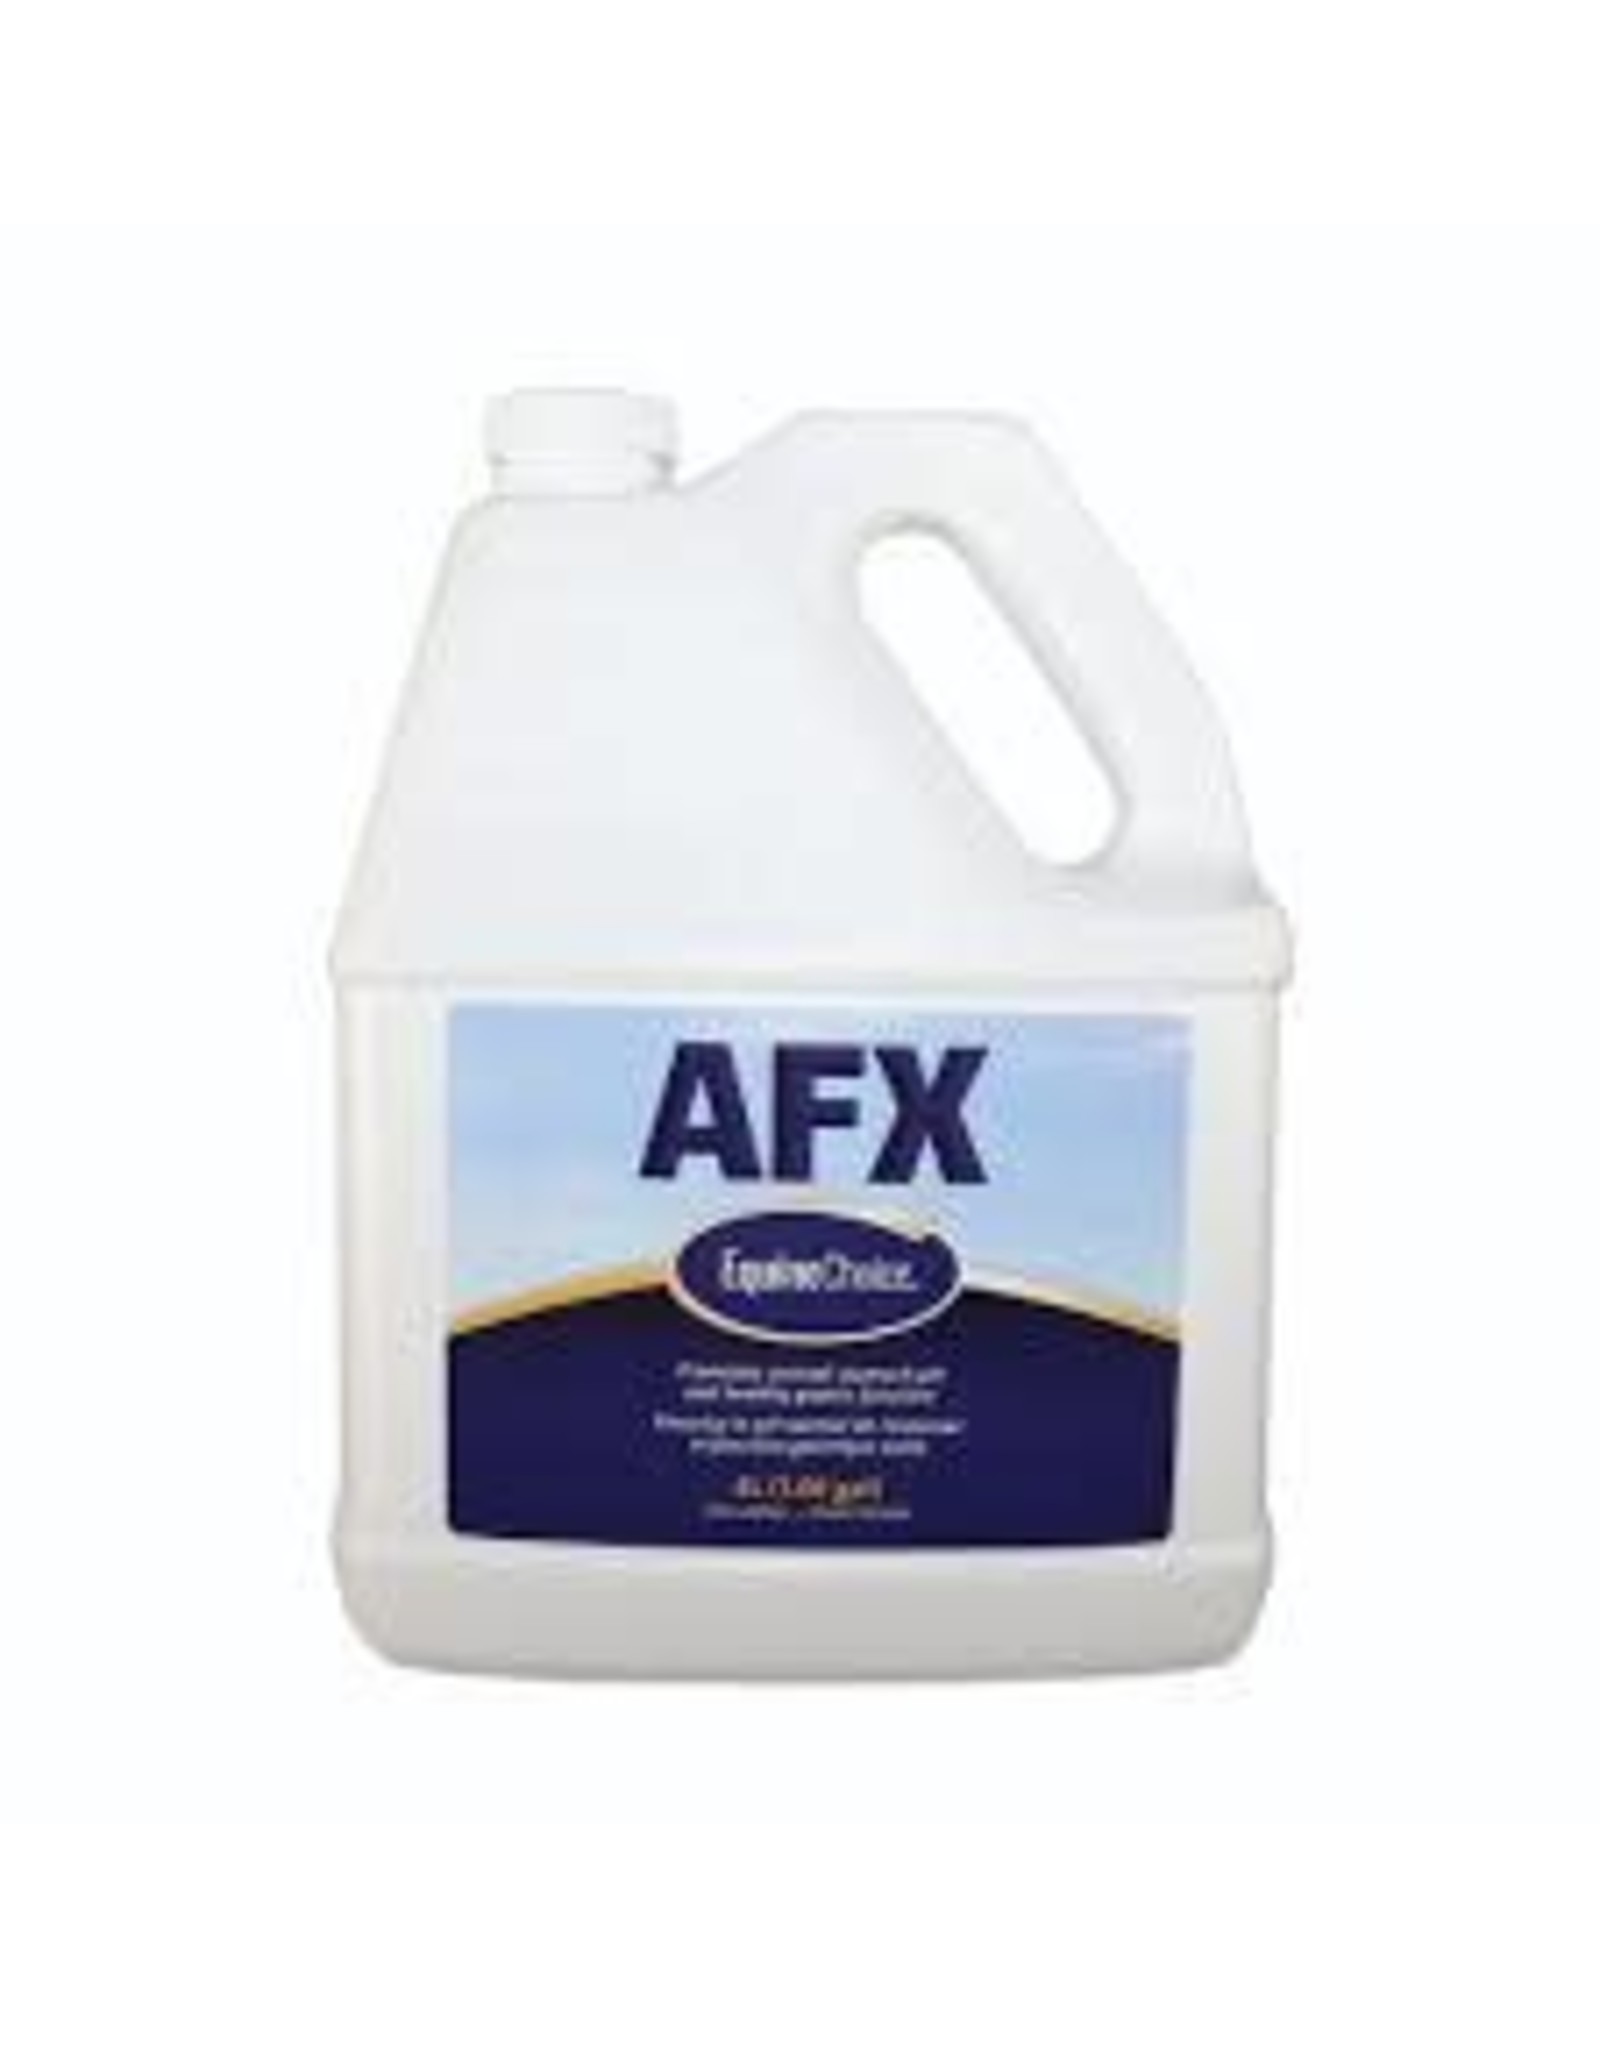 AFX by Equine Choice - 4 L bottle 1068-811